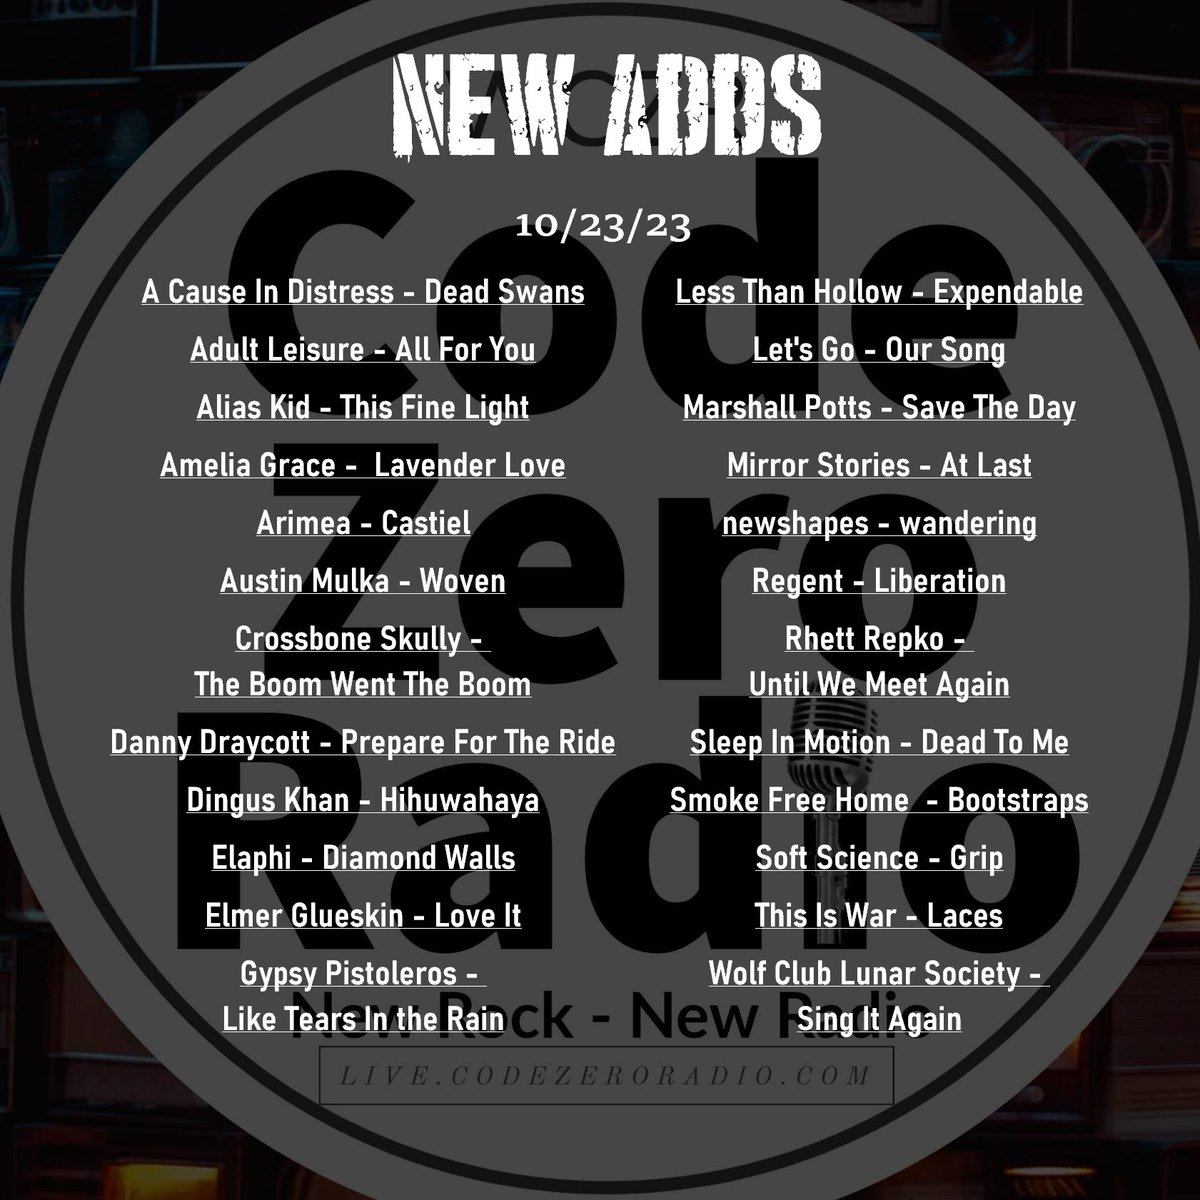 So many new adds, we had to resort to a smaller font size! That's a good thing! Now in rotation and featured on Fresh Rocks, weekdays at 1 pm CDT/6 pm GMT. Browser or App, new music lives here! #alternativerock #appstore #andriod #radio #Nobex #iPhone #alternative #app